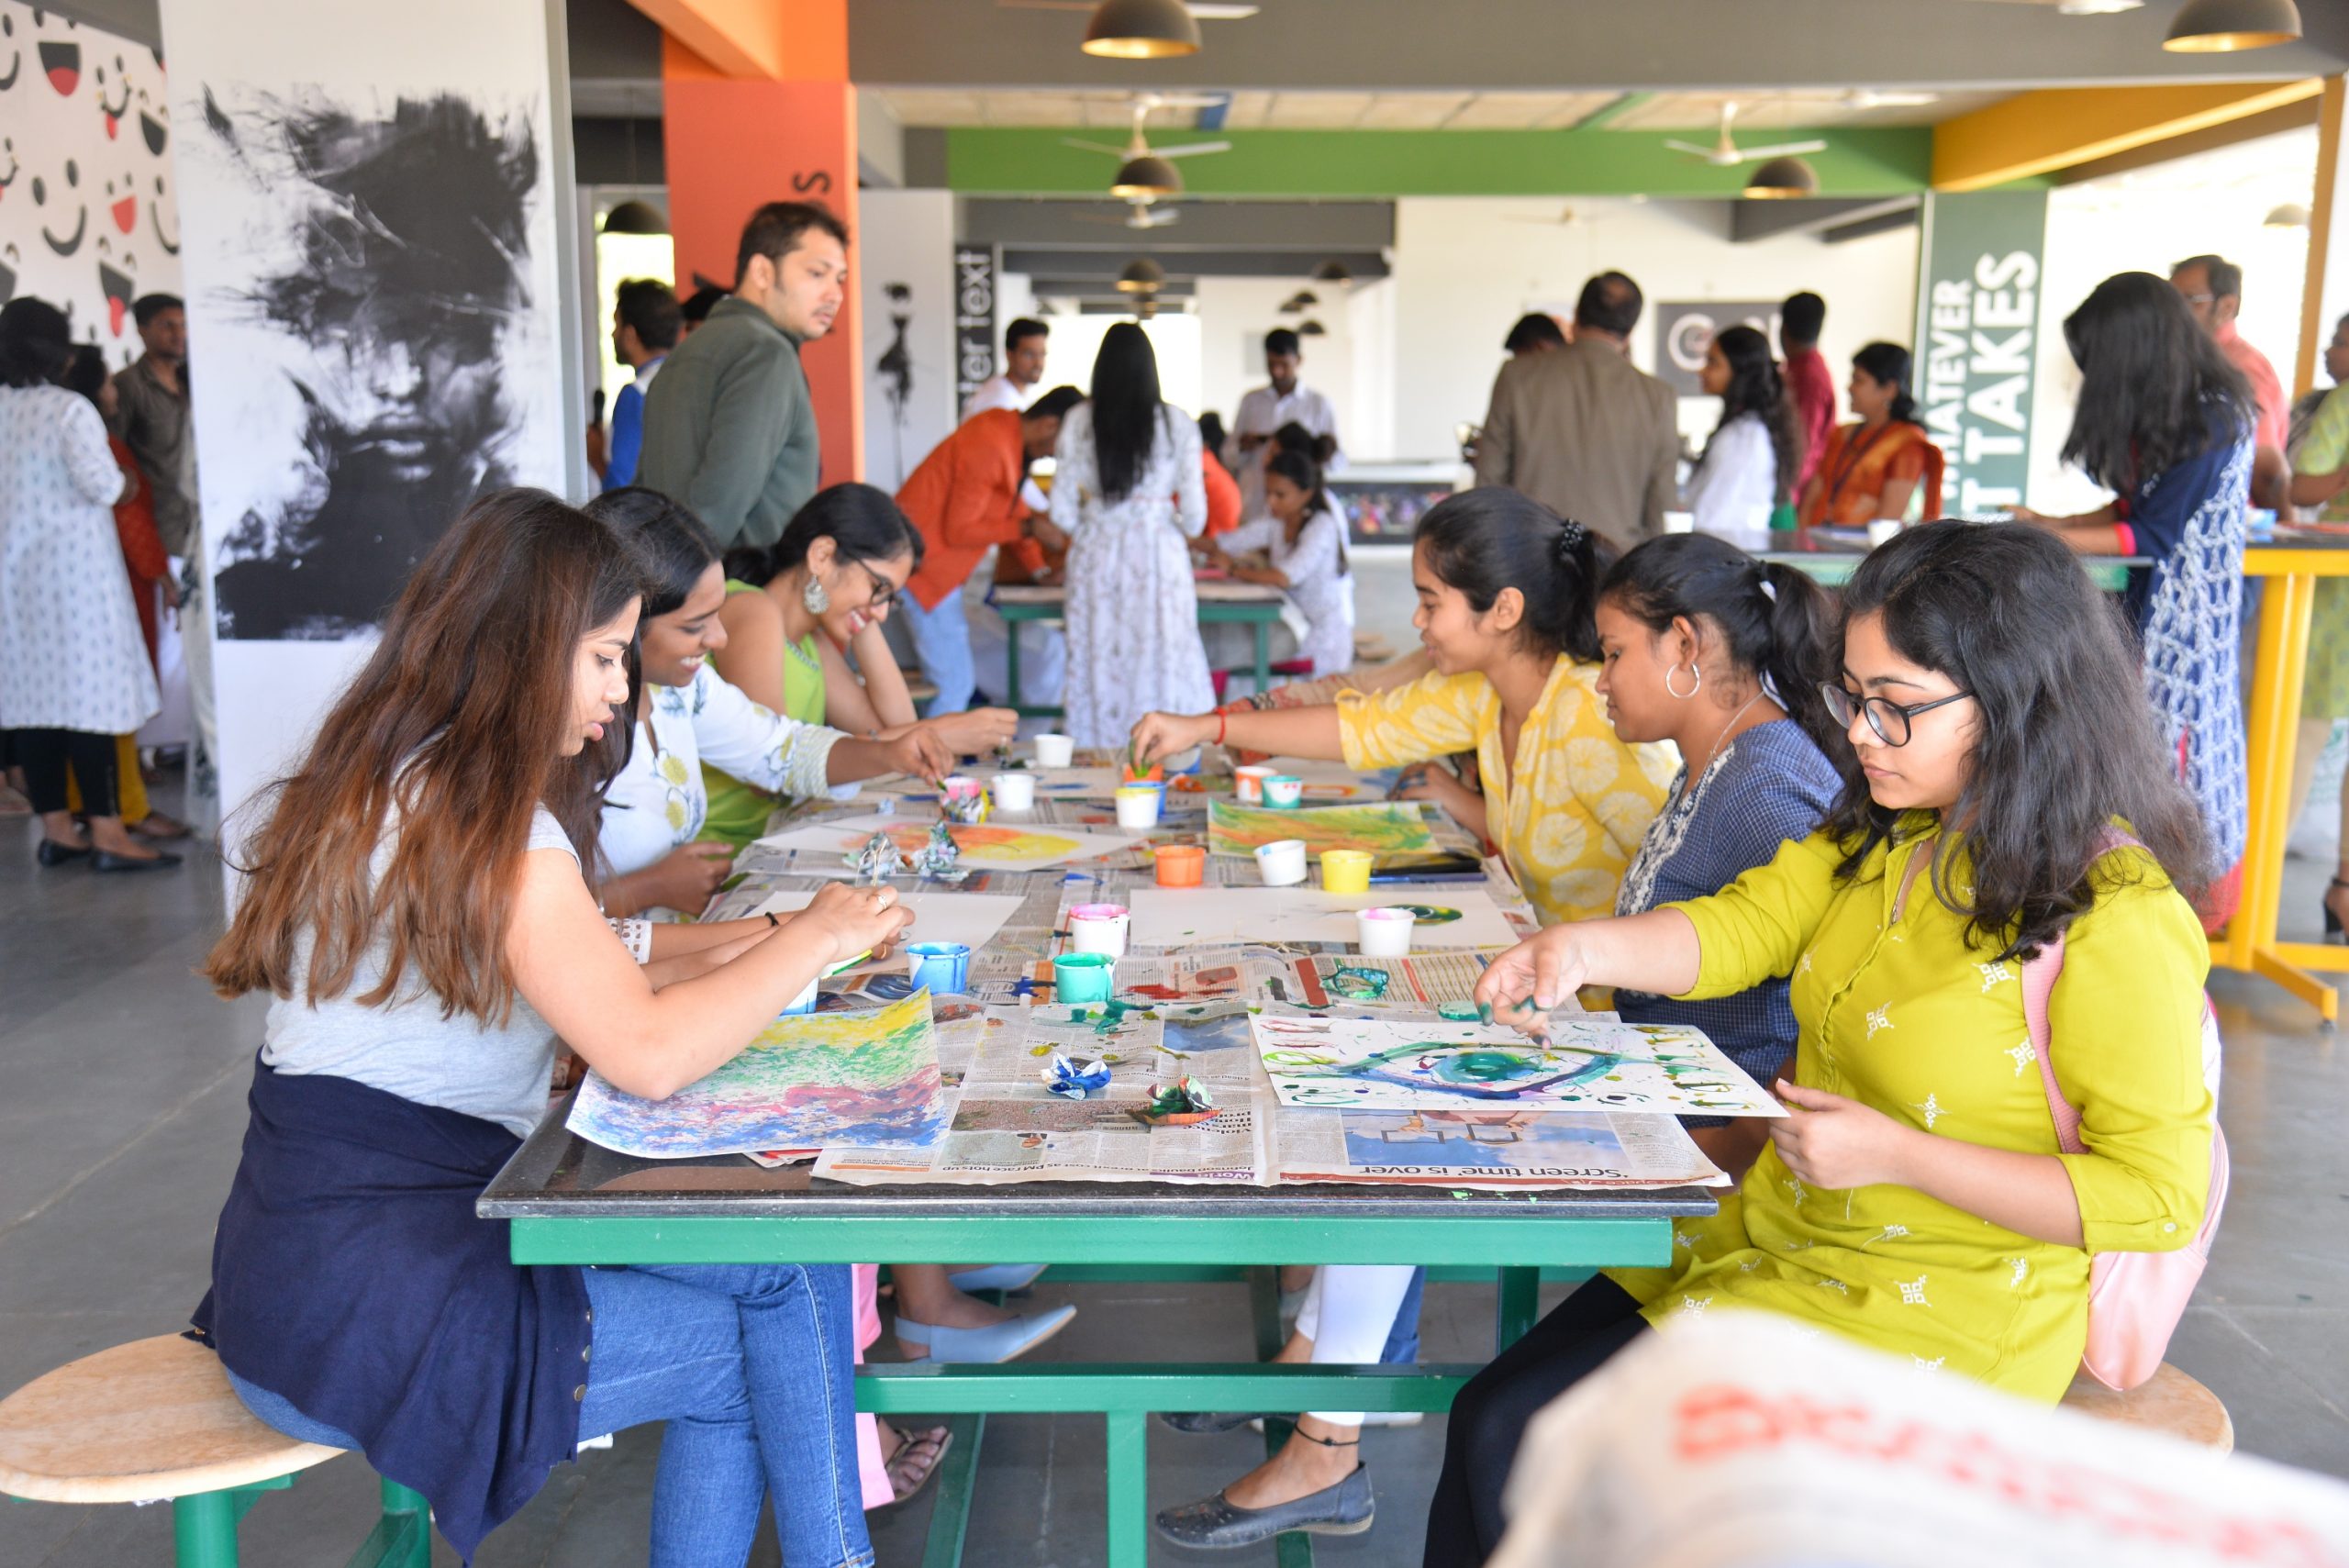 Vogue Institute of Art & Design marks Republic Day with artistic paintings and ethnic drapes